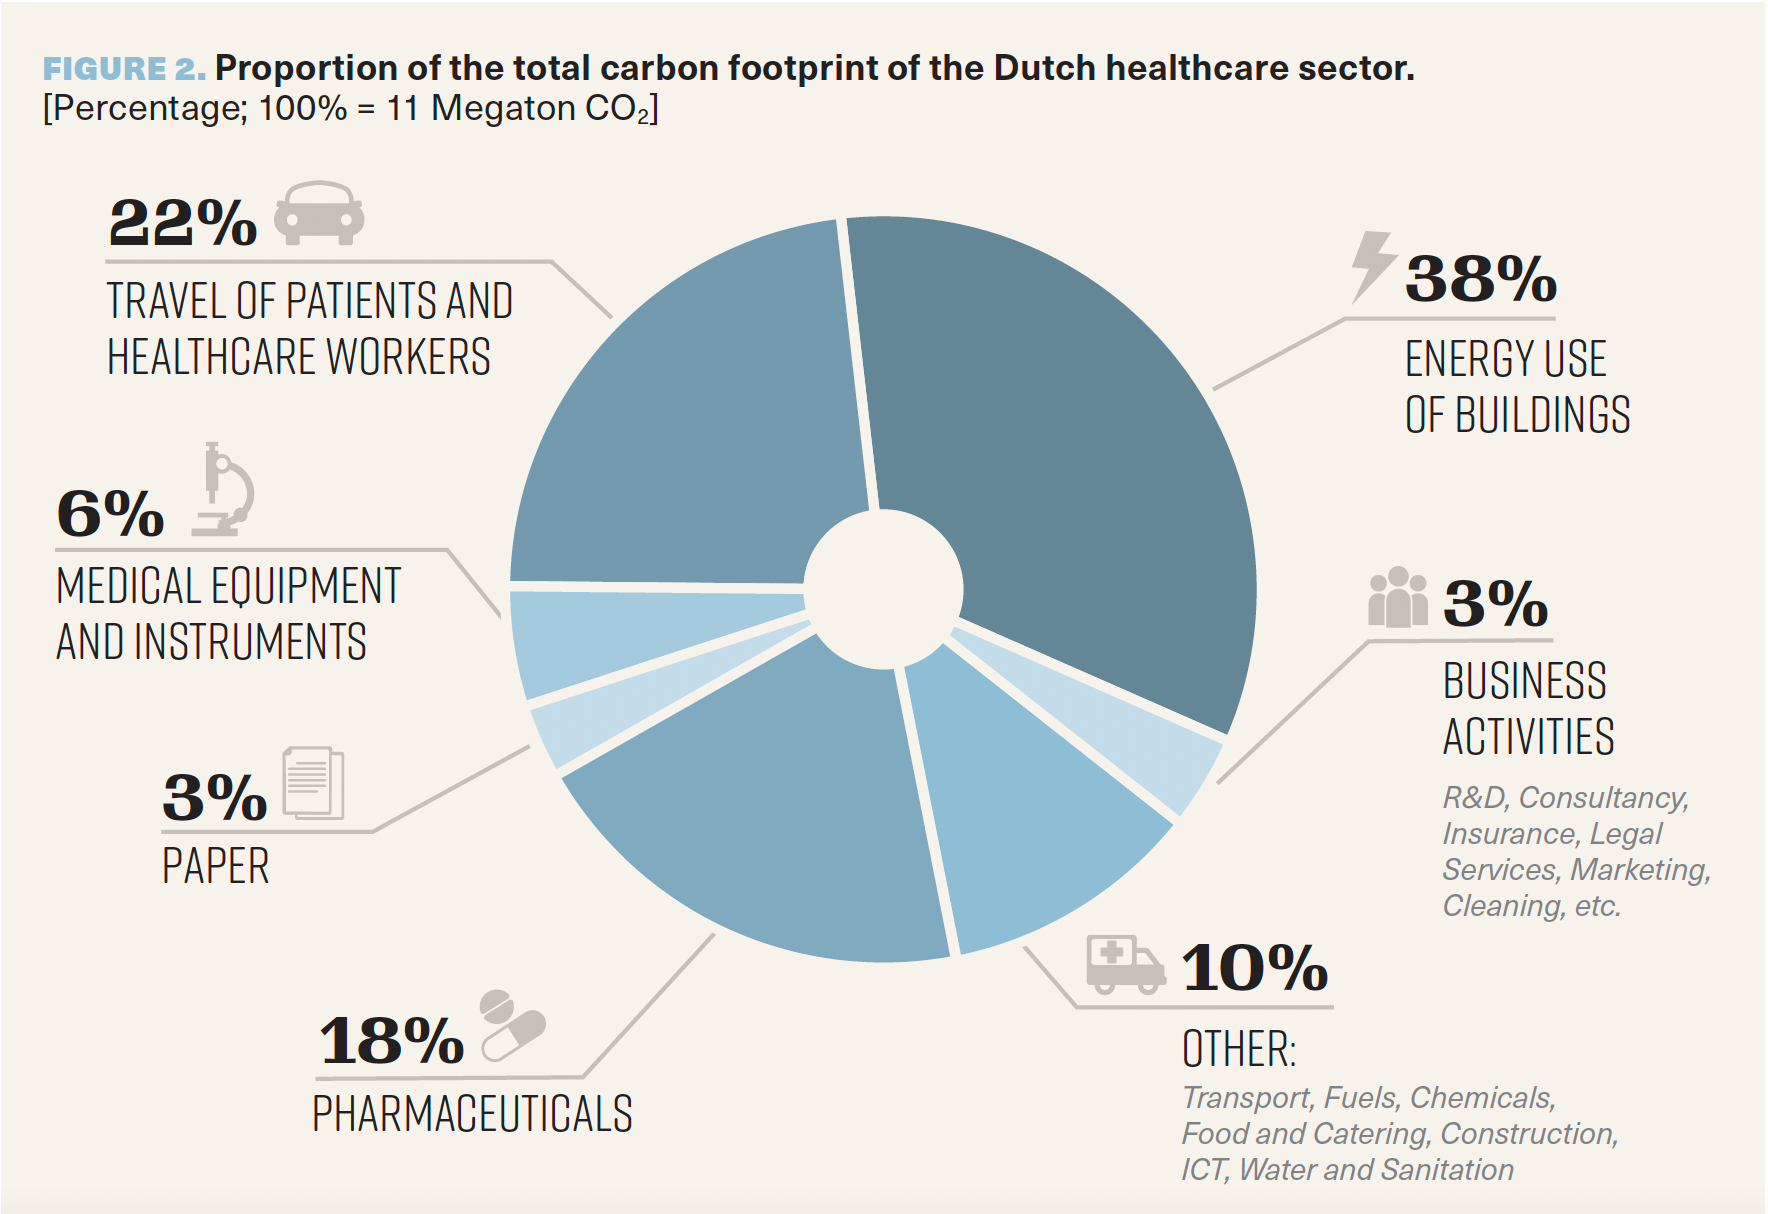 Figure 2. Proportion of the total carbon footprint of the Dutch healthcare sector. [Percentage; 100% = 11 Megaton CO2]